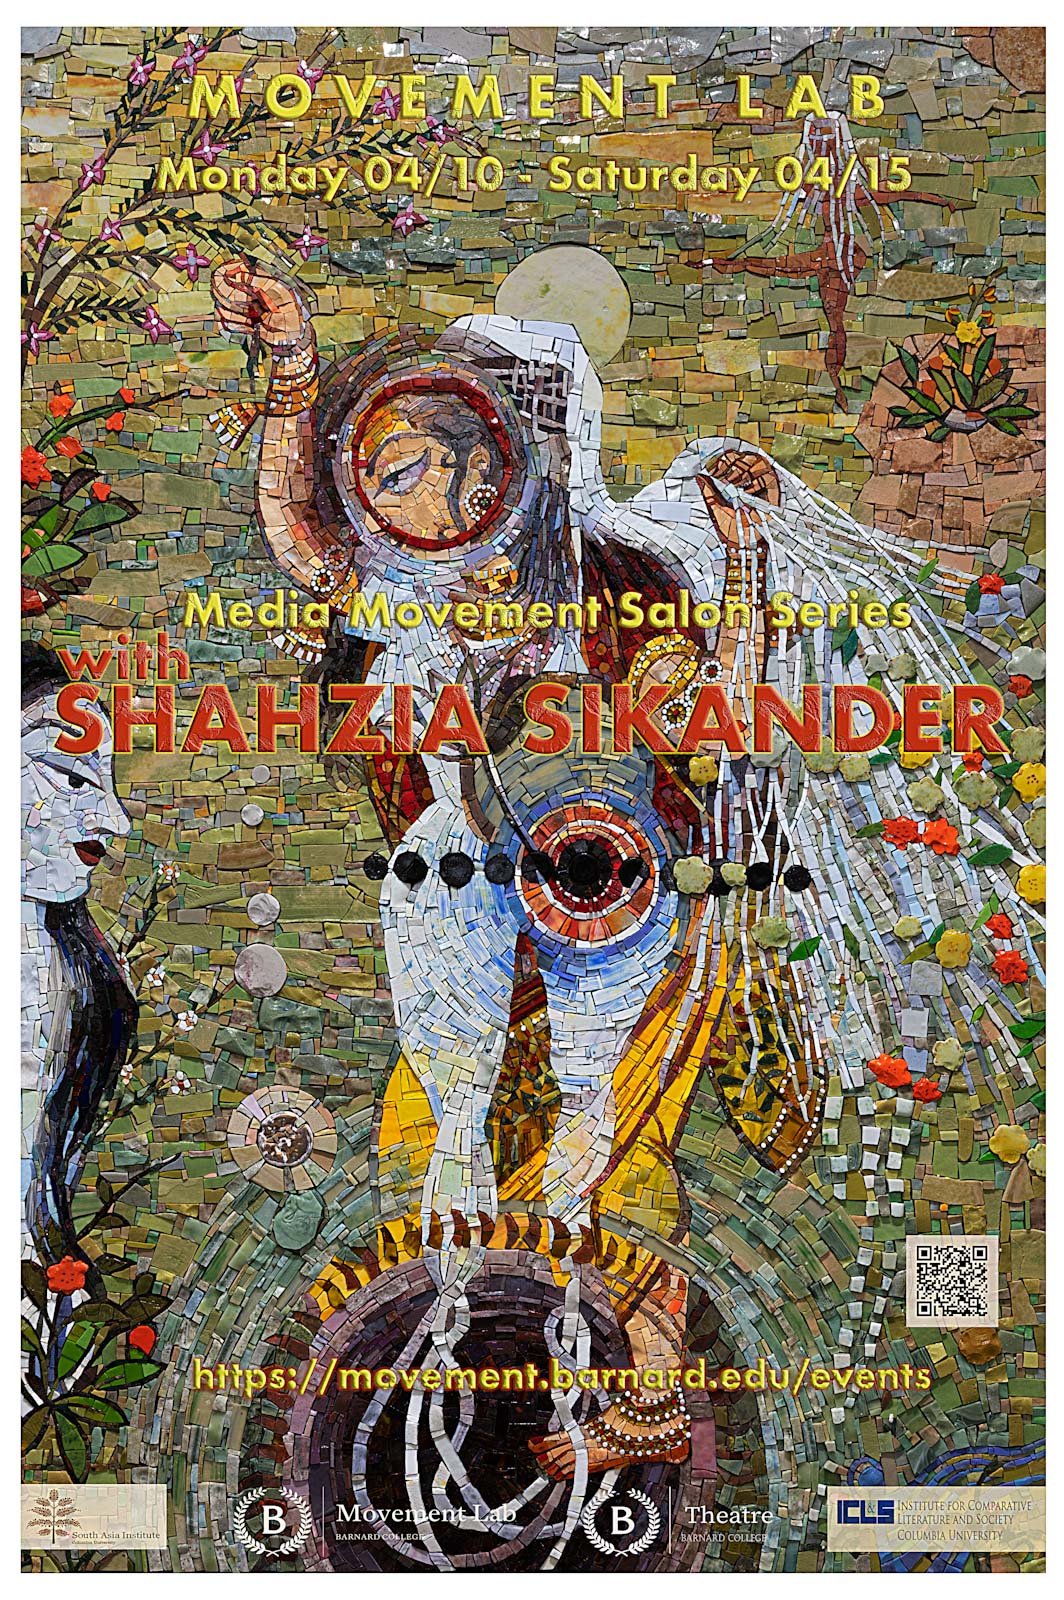  mosaic of a woman in a garden by Shahzia Sikander